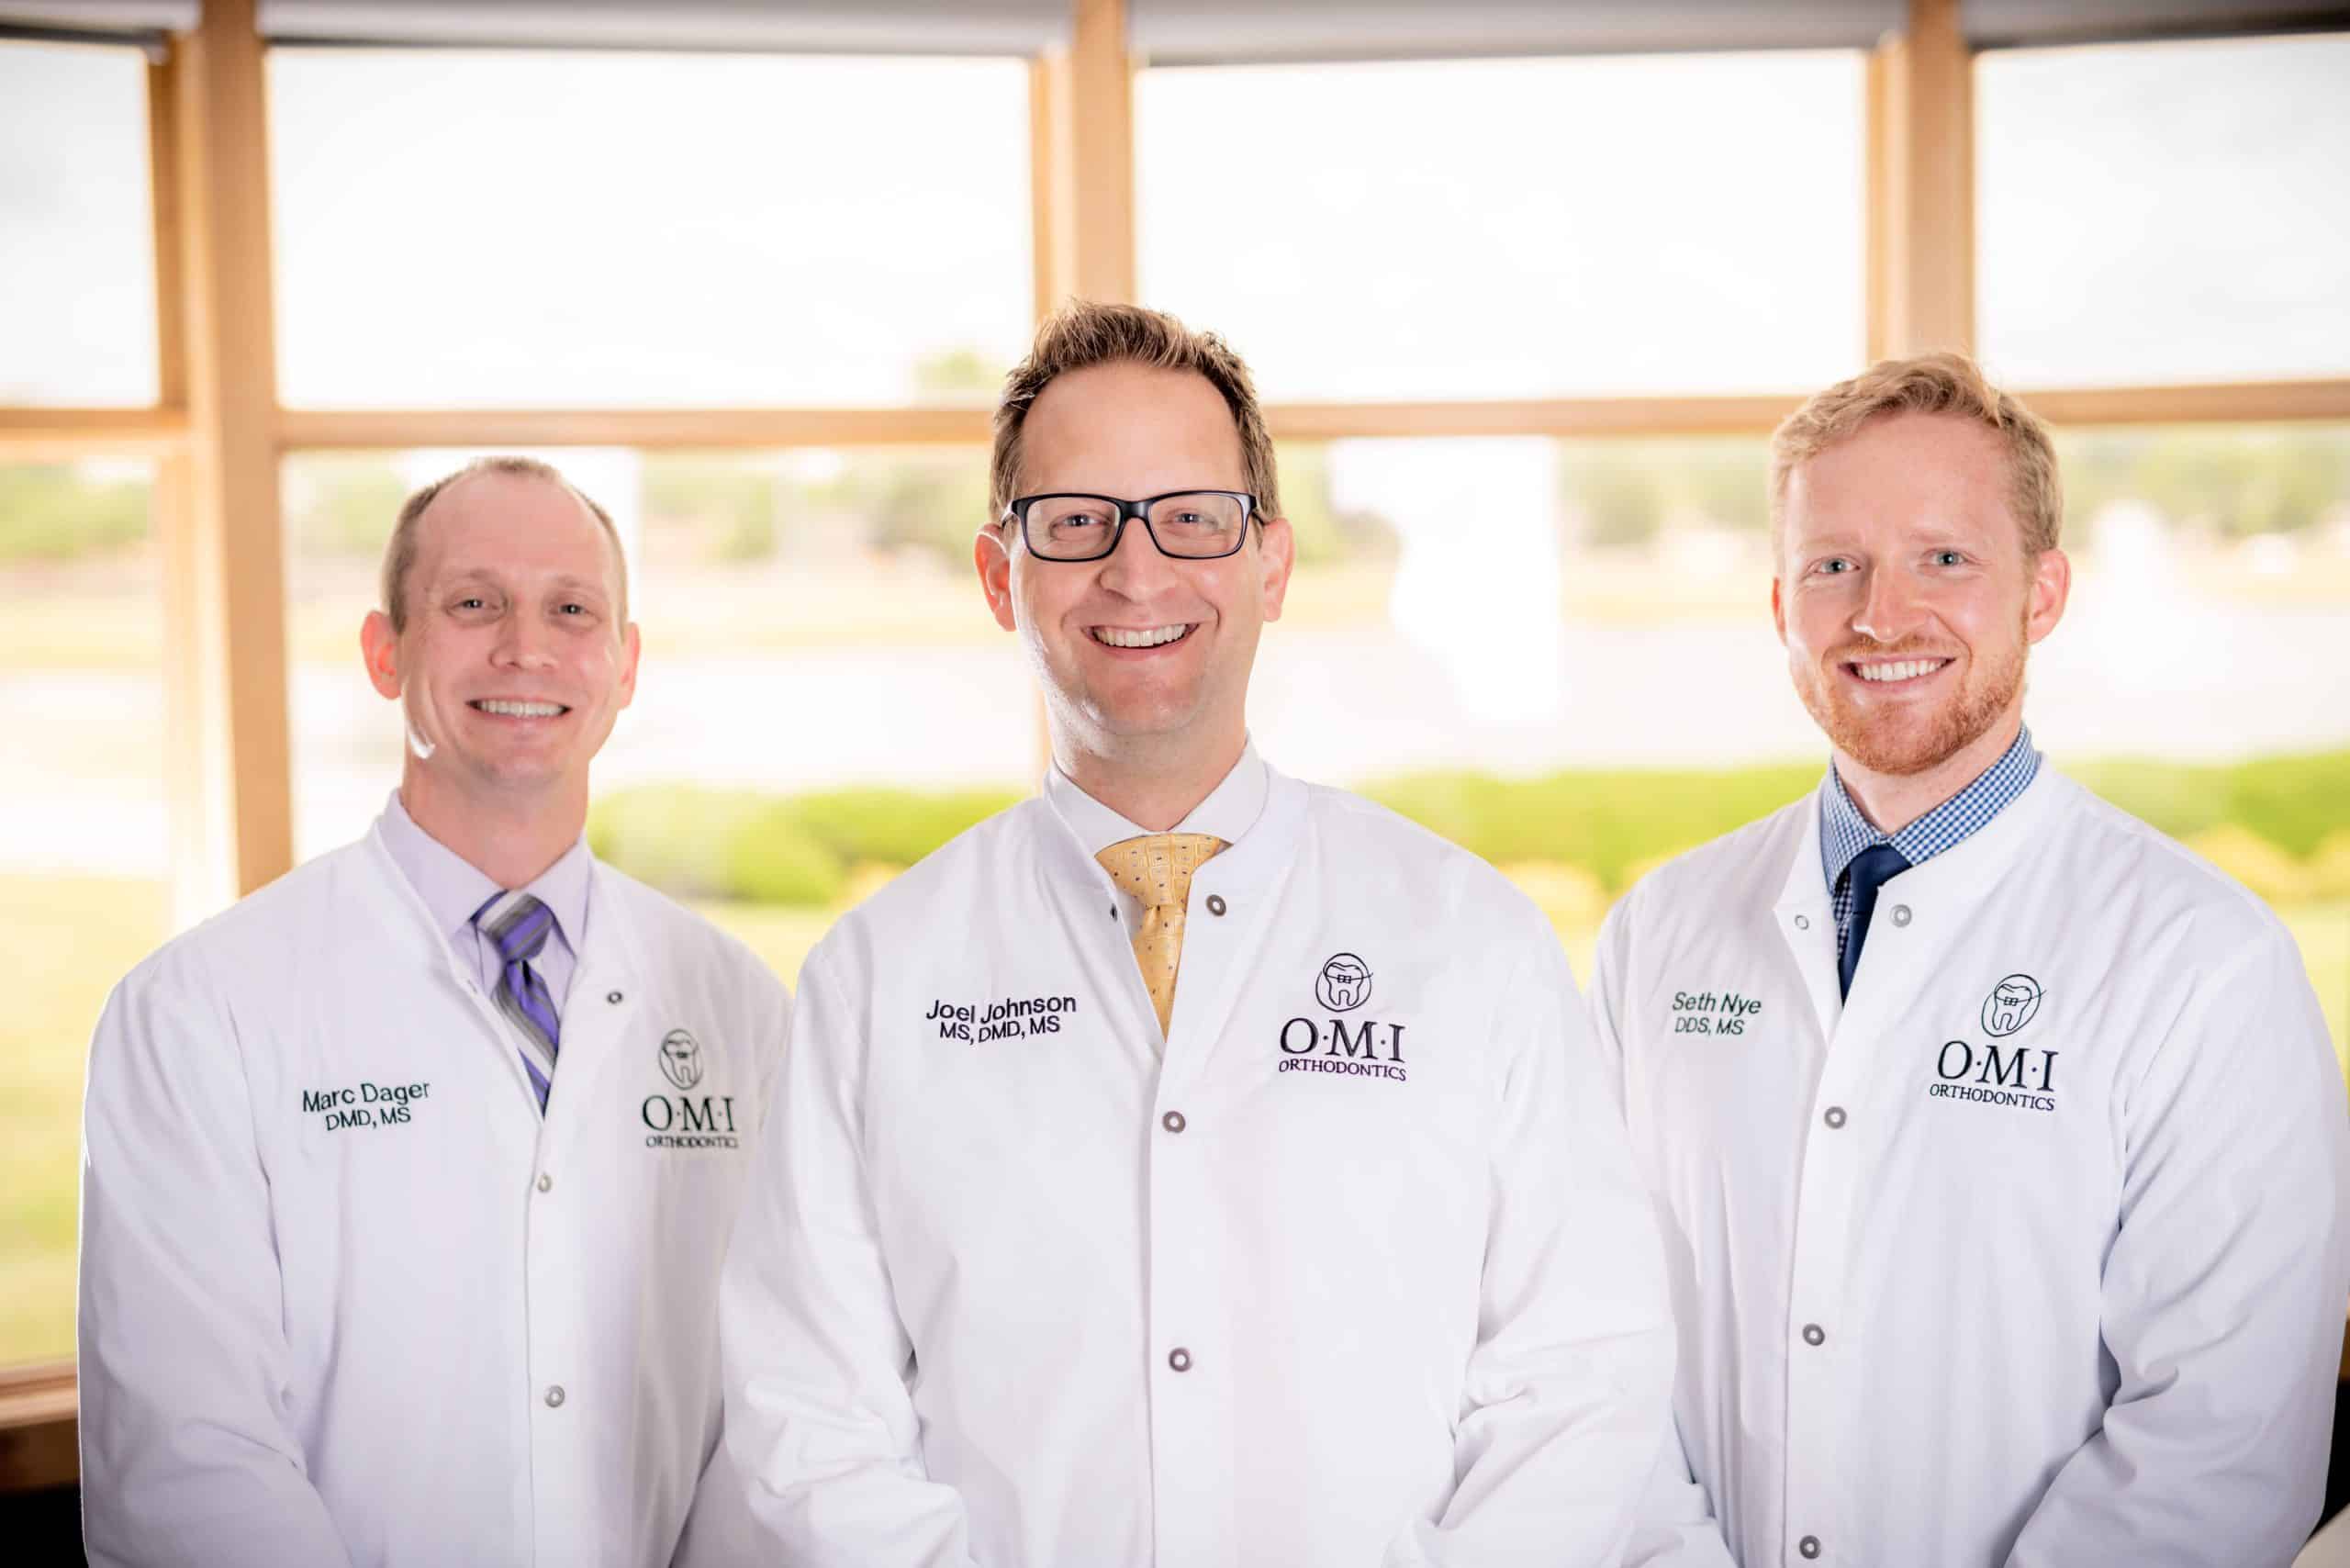 about us doctors OMI Orthodontics dentist in Fort Wayne Auburn Fishers Indiana Dr. Joel Johnson, MS, DMD, MS Dr. Marcus Dager, DMD, MS Dr. Seth Nye, DDS, MS